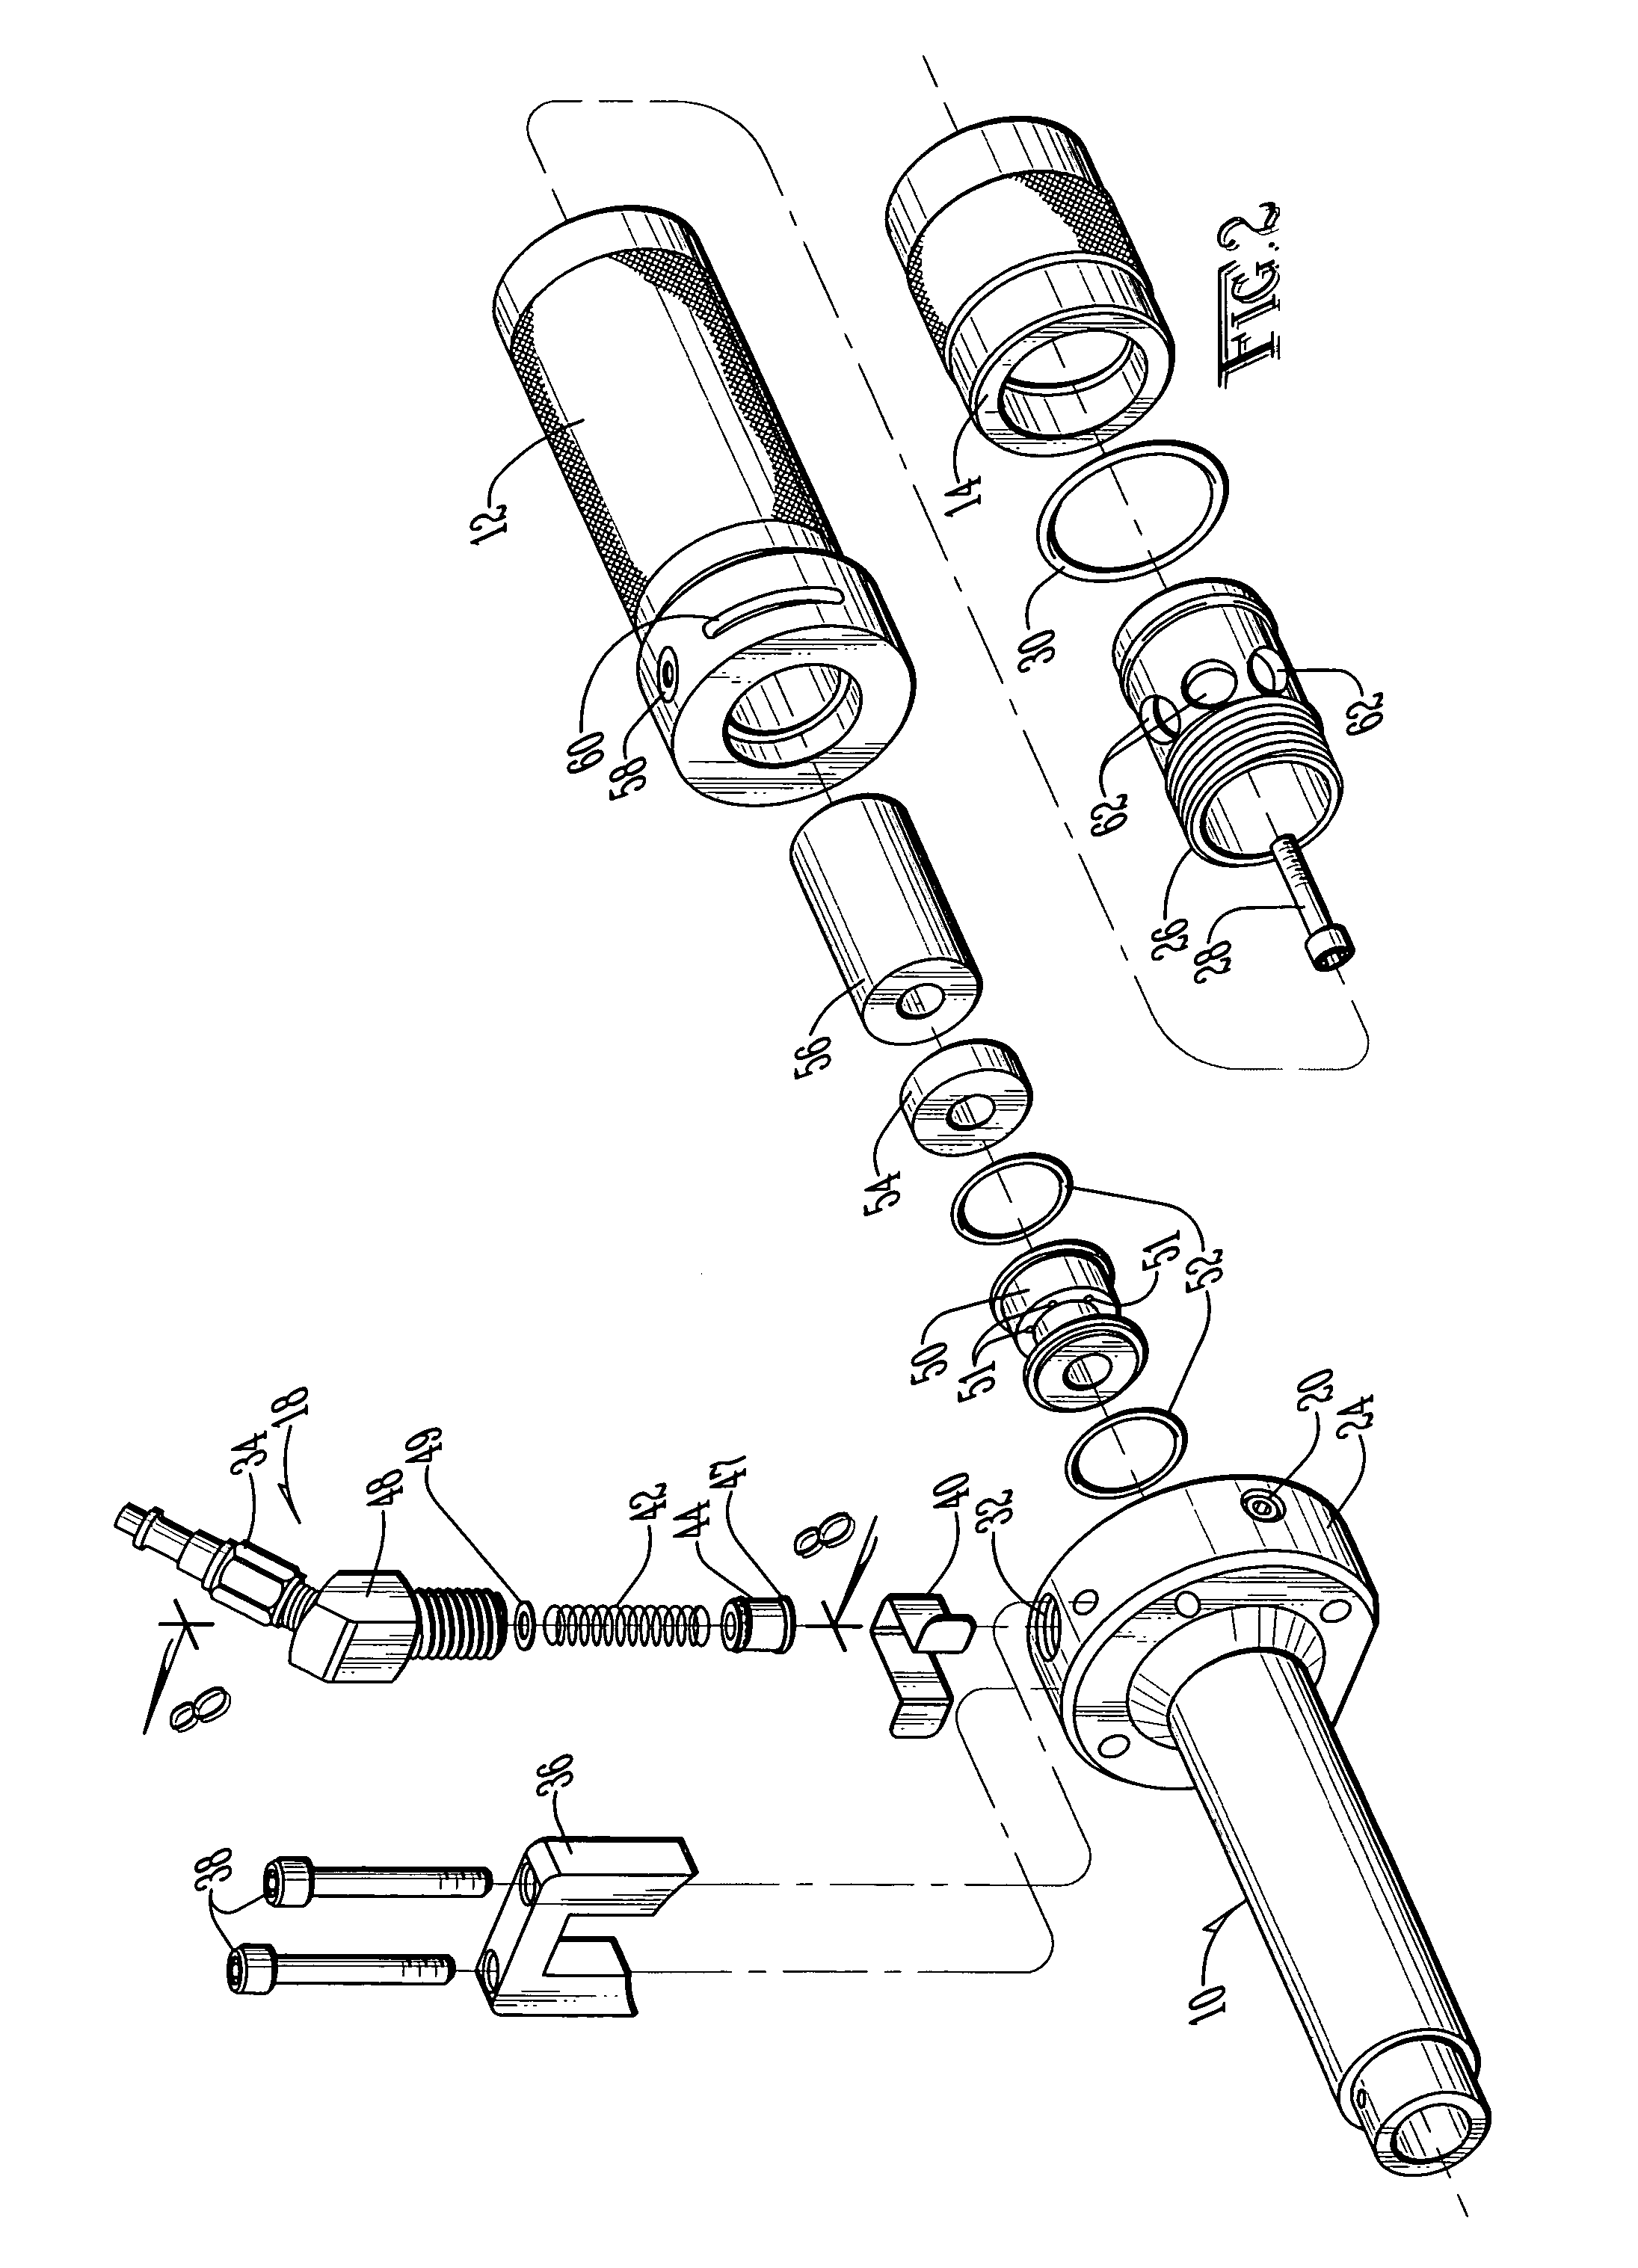 Inflation and deflation apparatus